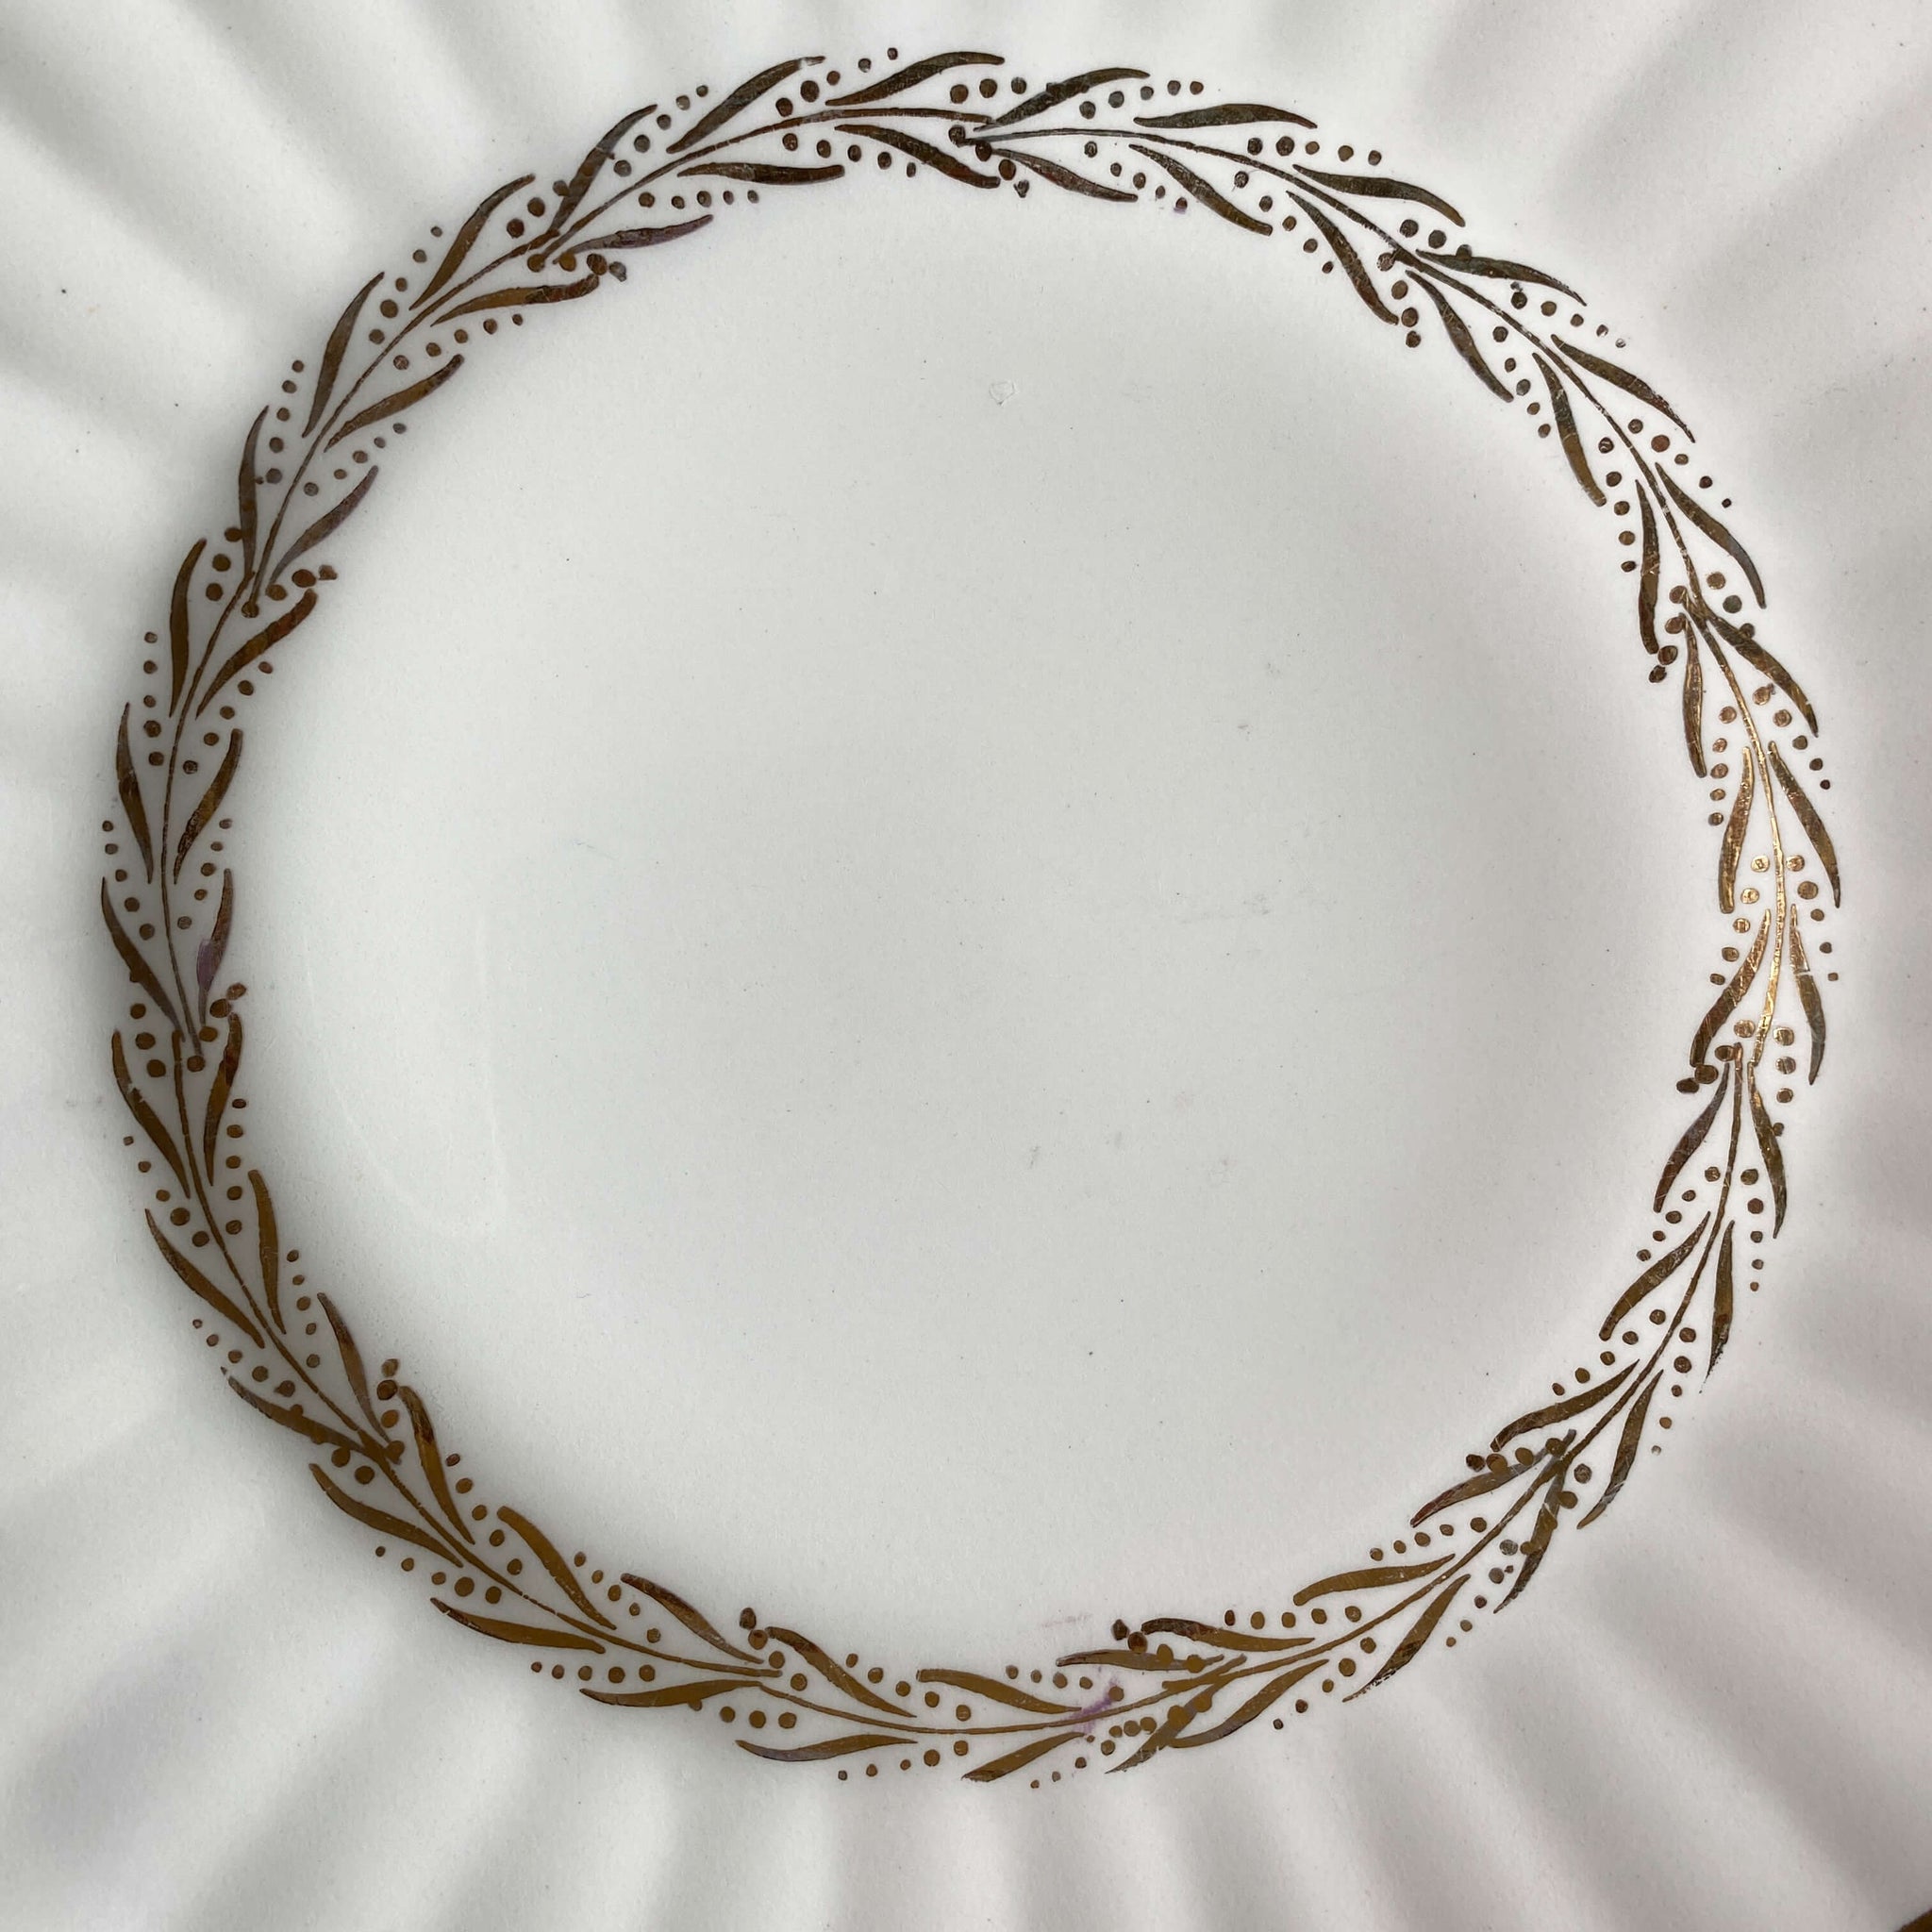 VINTAGE J & G MEAKIN CLASSIC WHITE GARLAND GOLD SQUARE DESSERT PLATES -SET OF TWO CIRCA 1960S